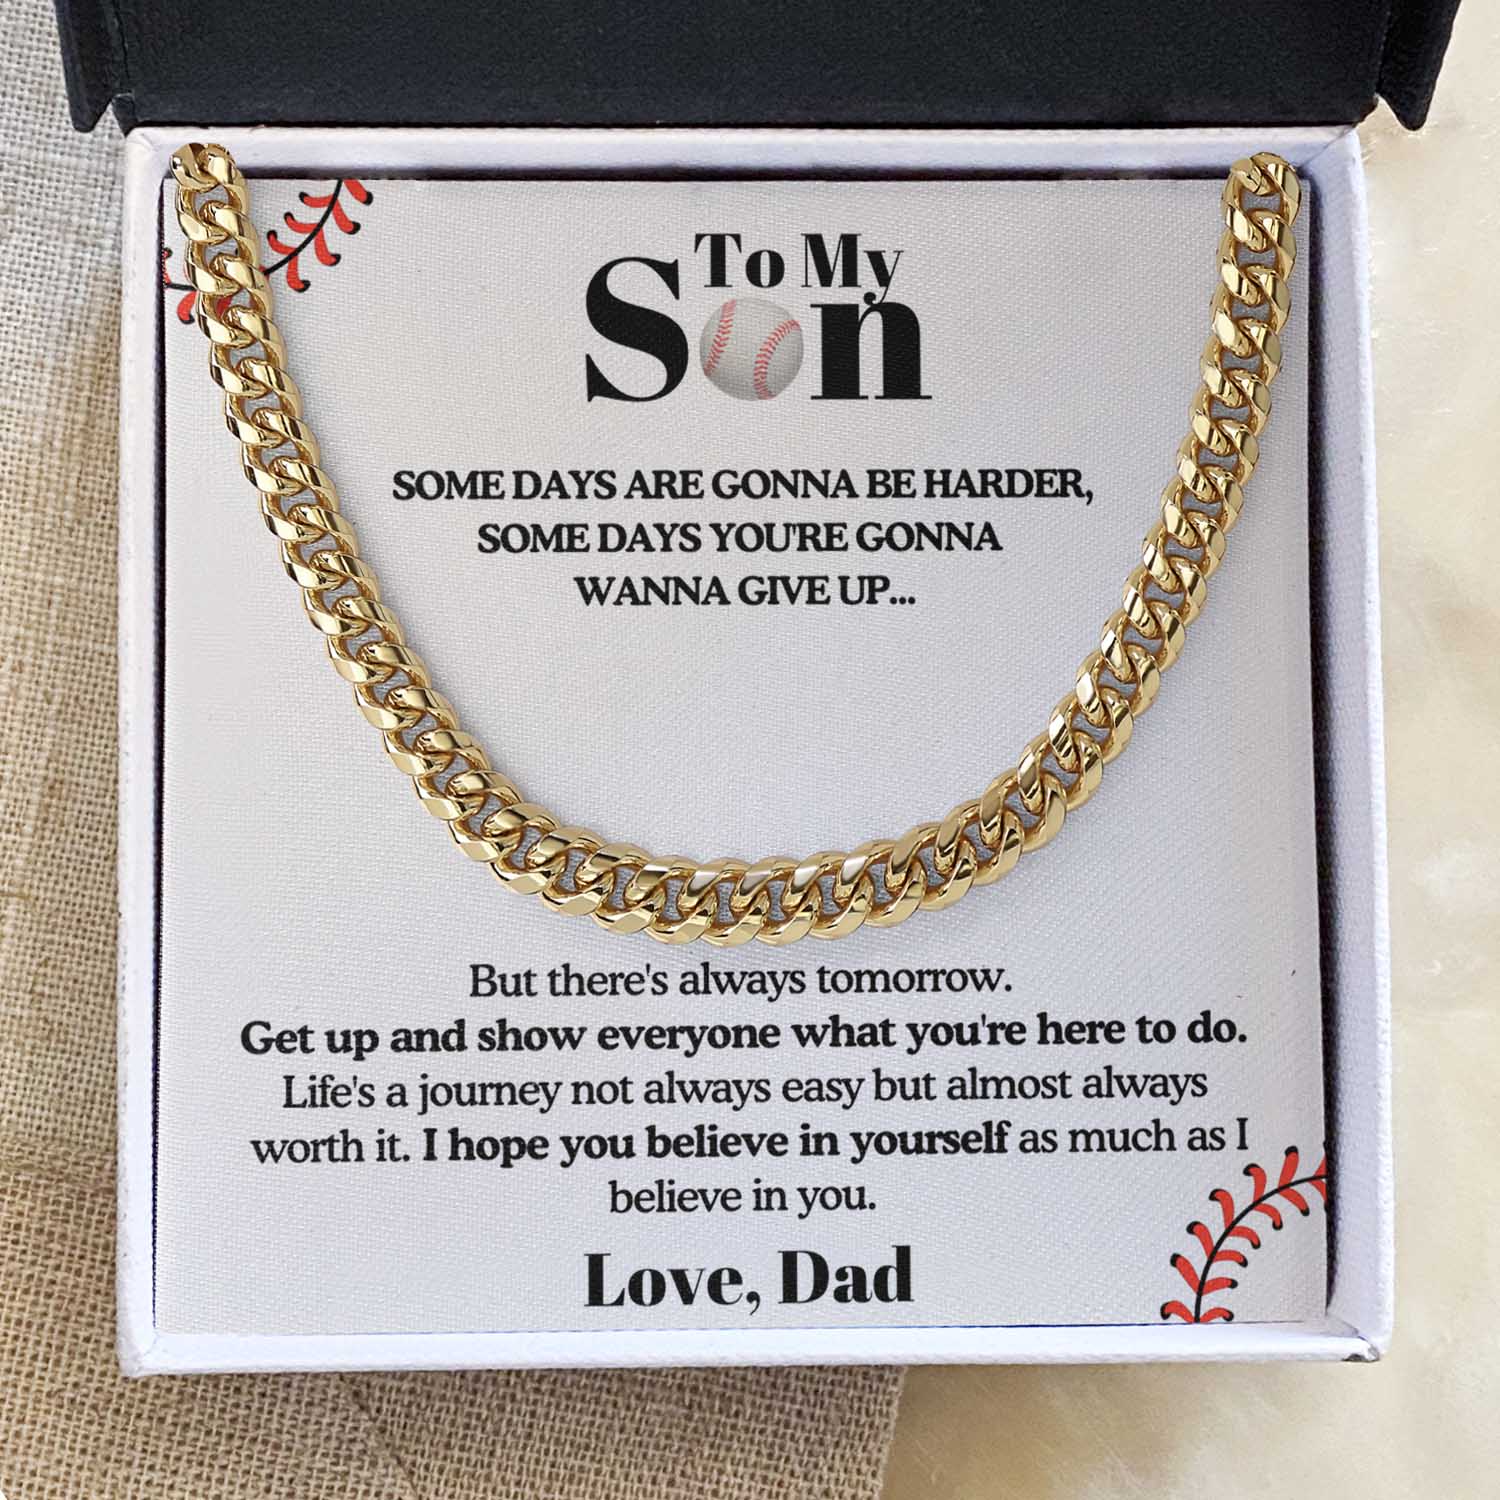 ShineOn Fulfillment Jewelry 14K Yellow Gold Finish / Standard Box To my Son from Dad - Get Up - 5mm Cuban Link Chain